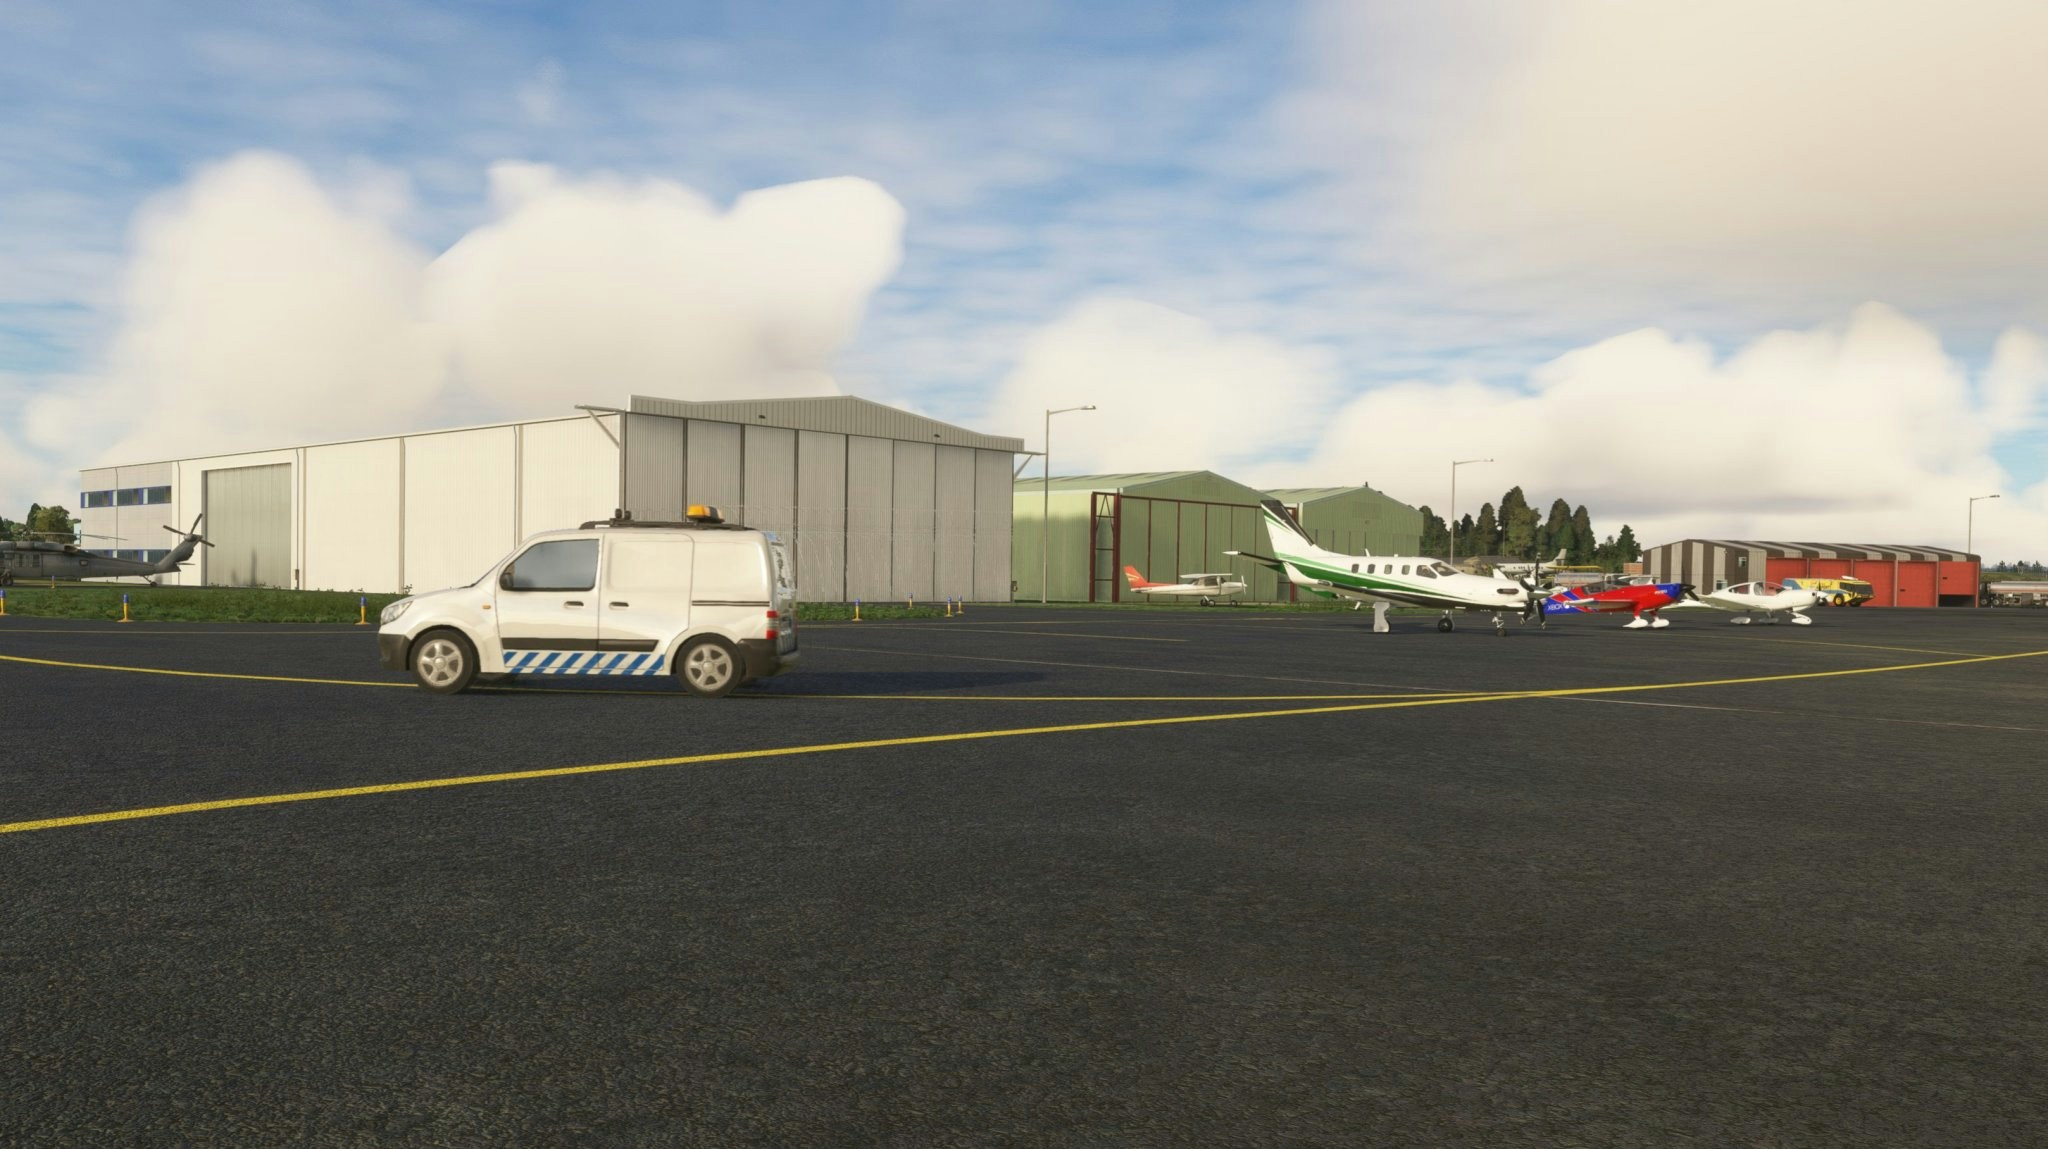 UK2000 Scenery Releases Carlisle Airport for MSFS